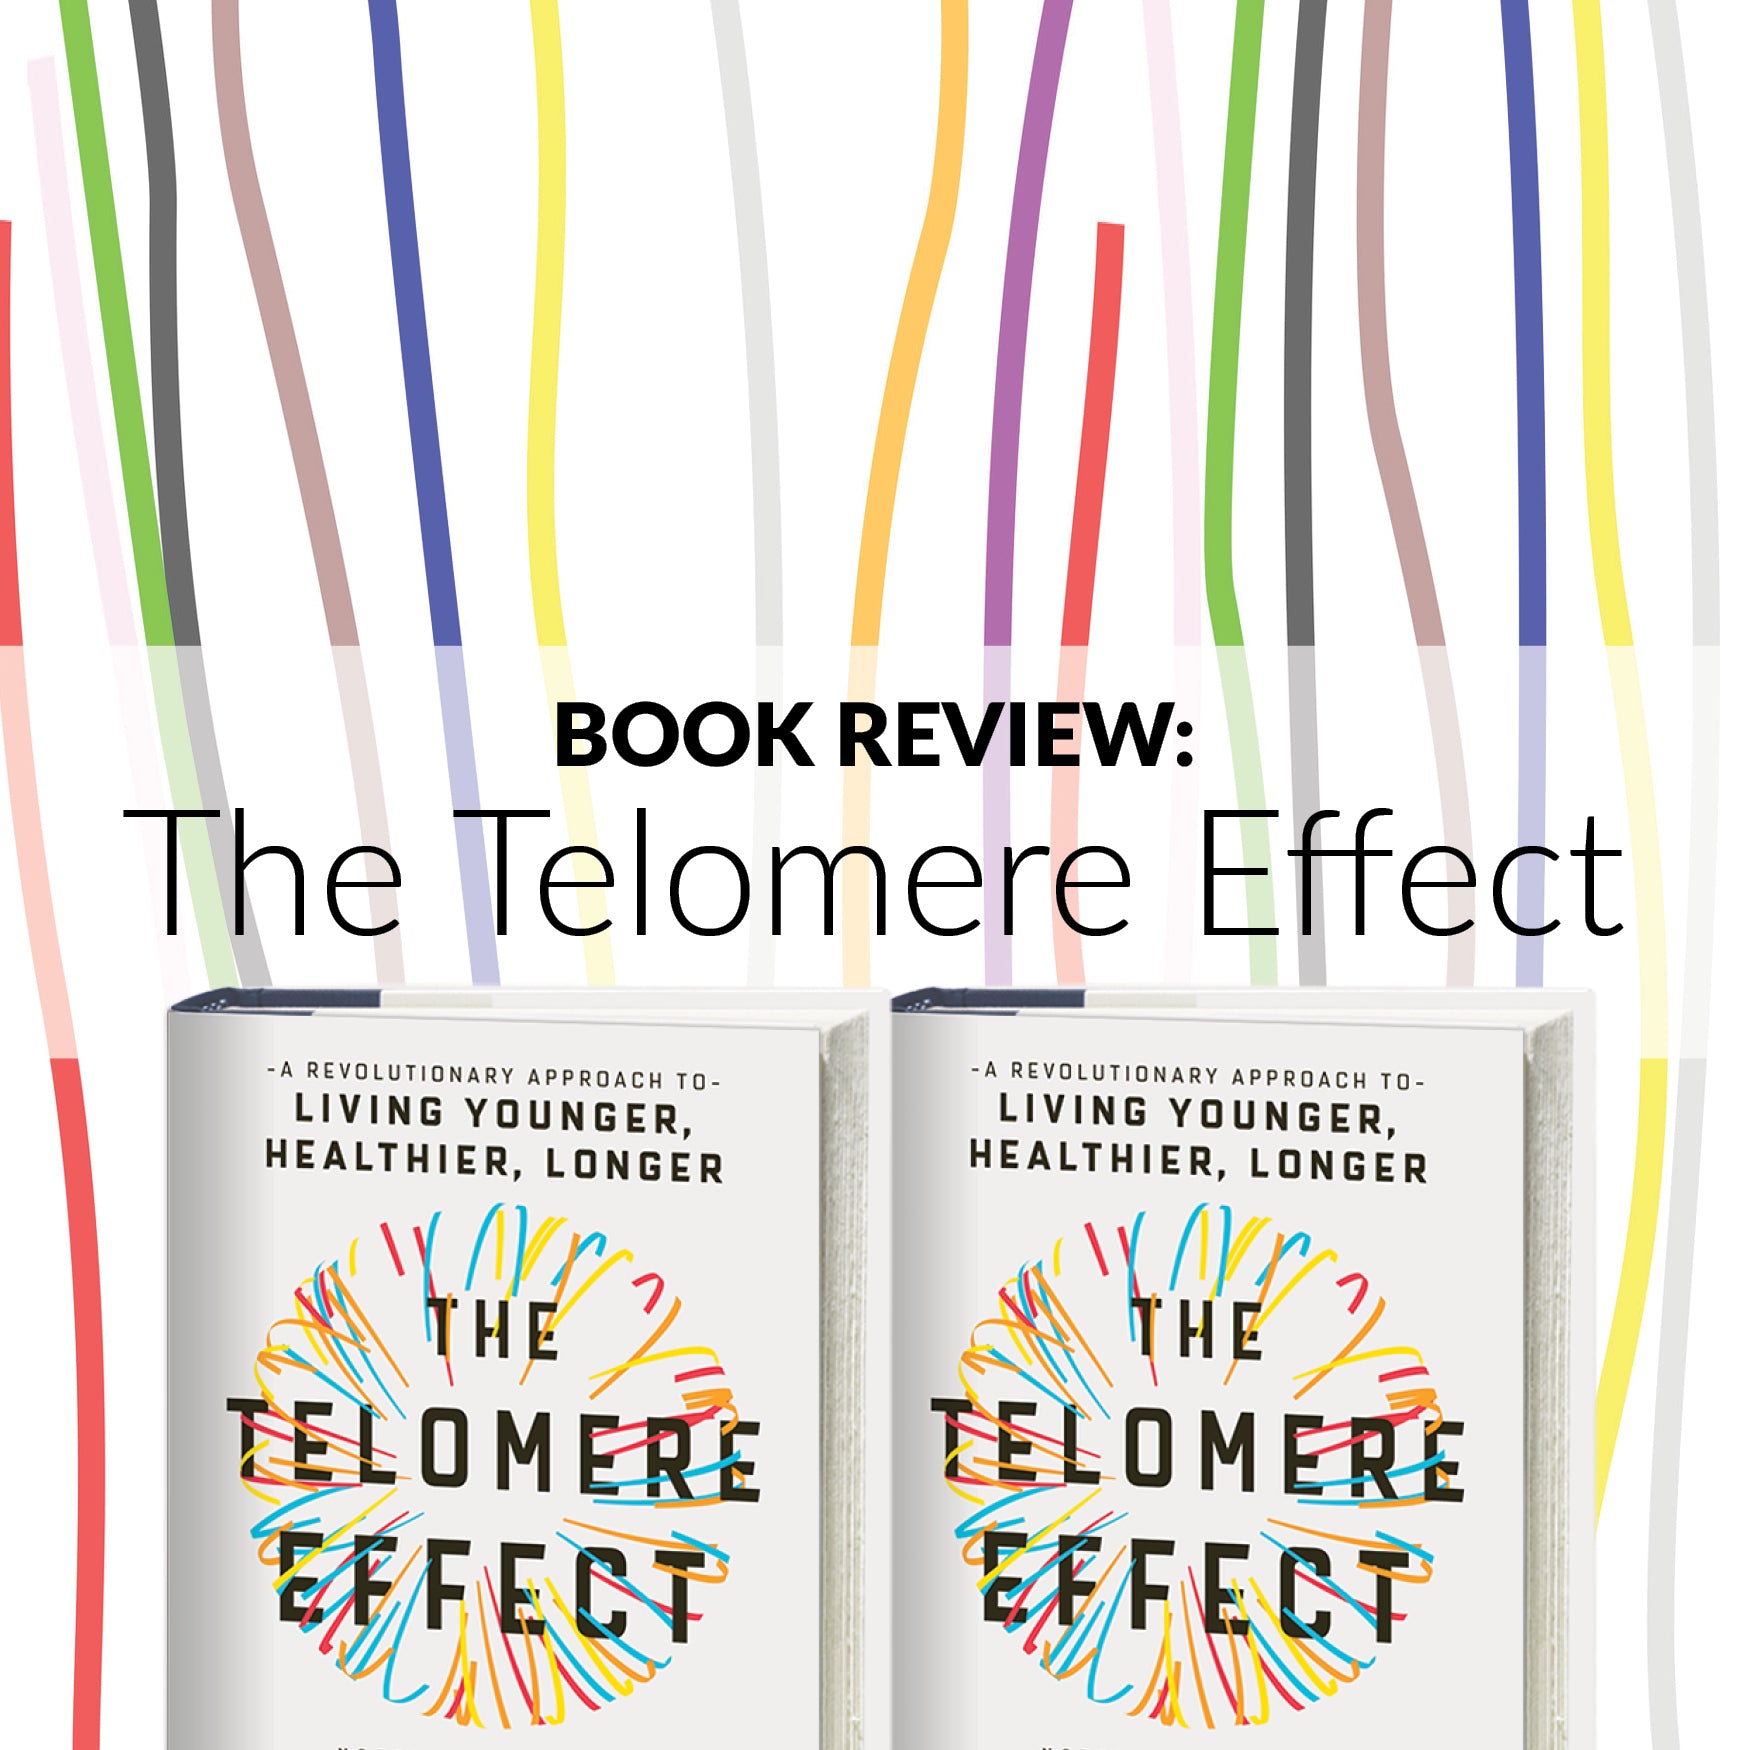 Book Review: The Telomere Effect